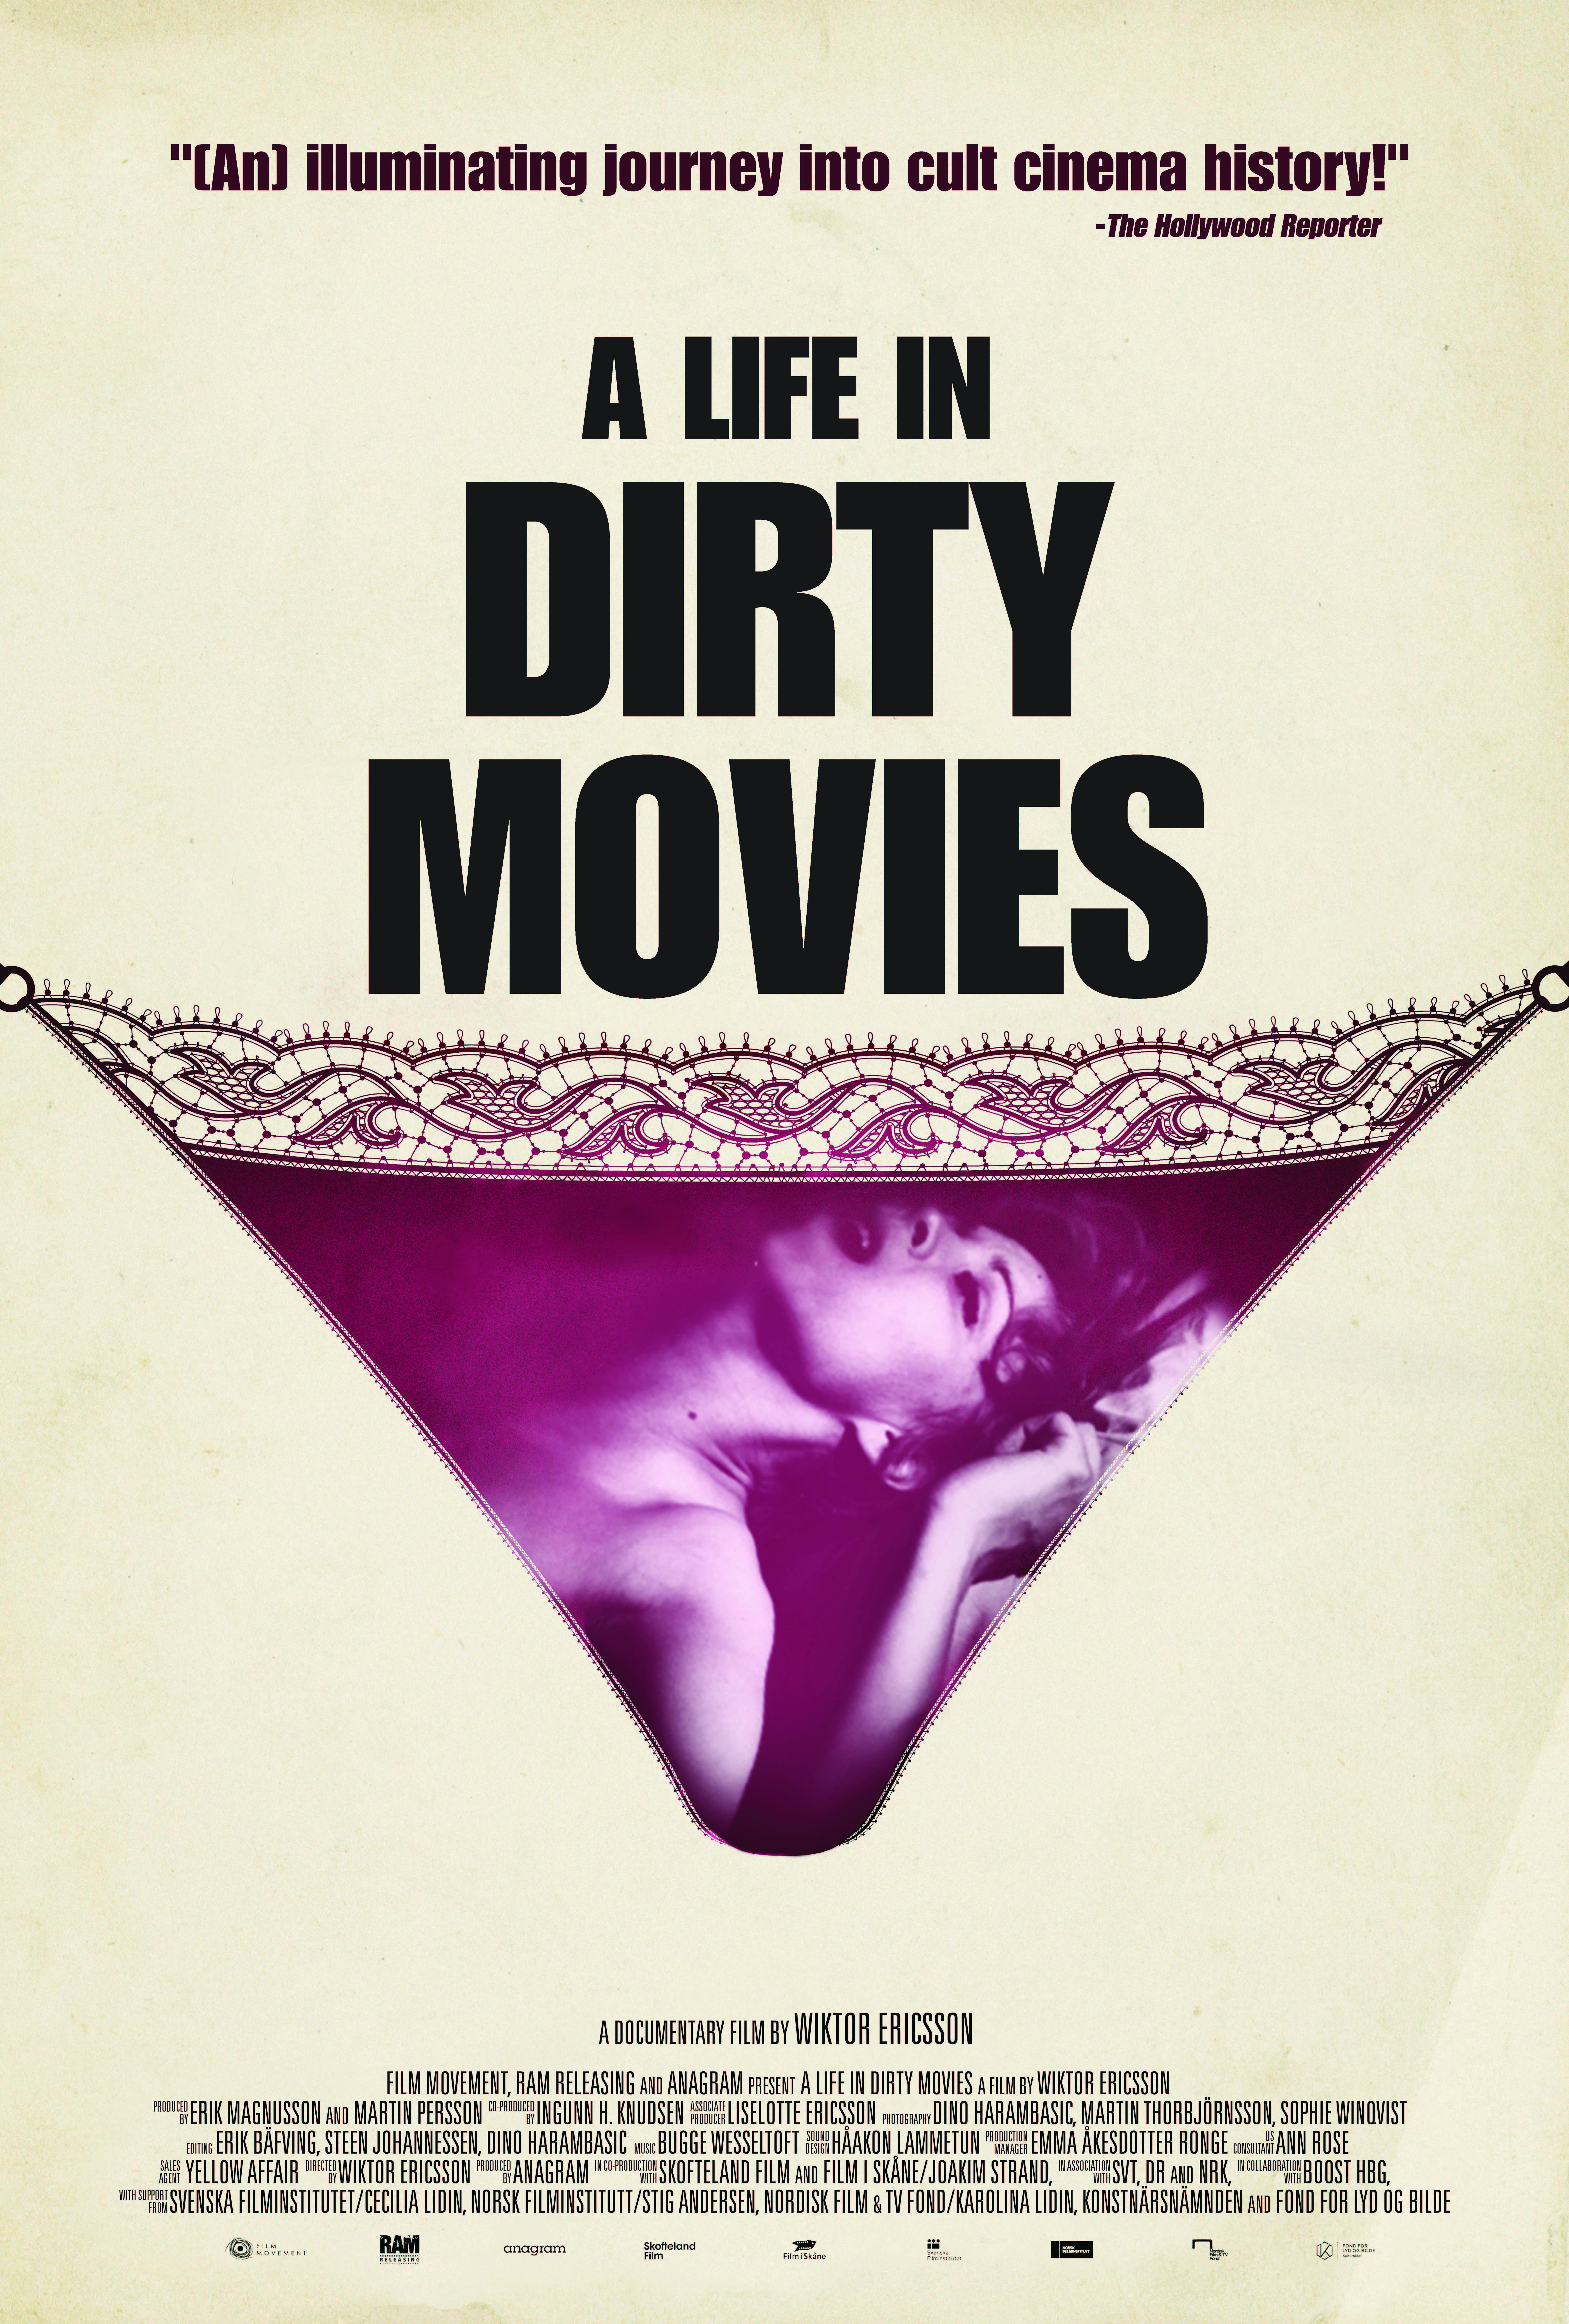 A Life in Dirty Movies (2013) Screenshot 1 